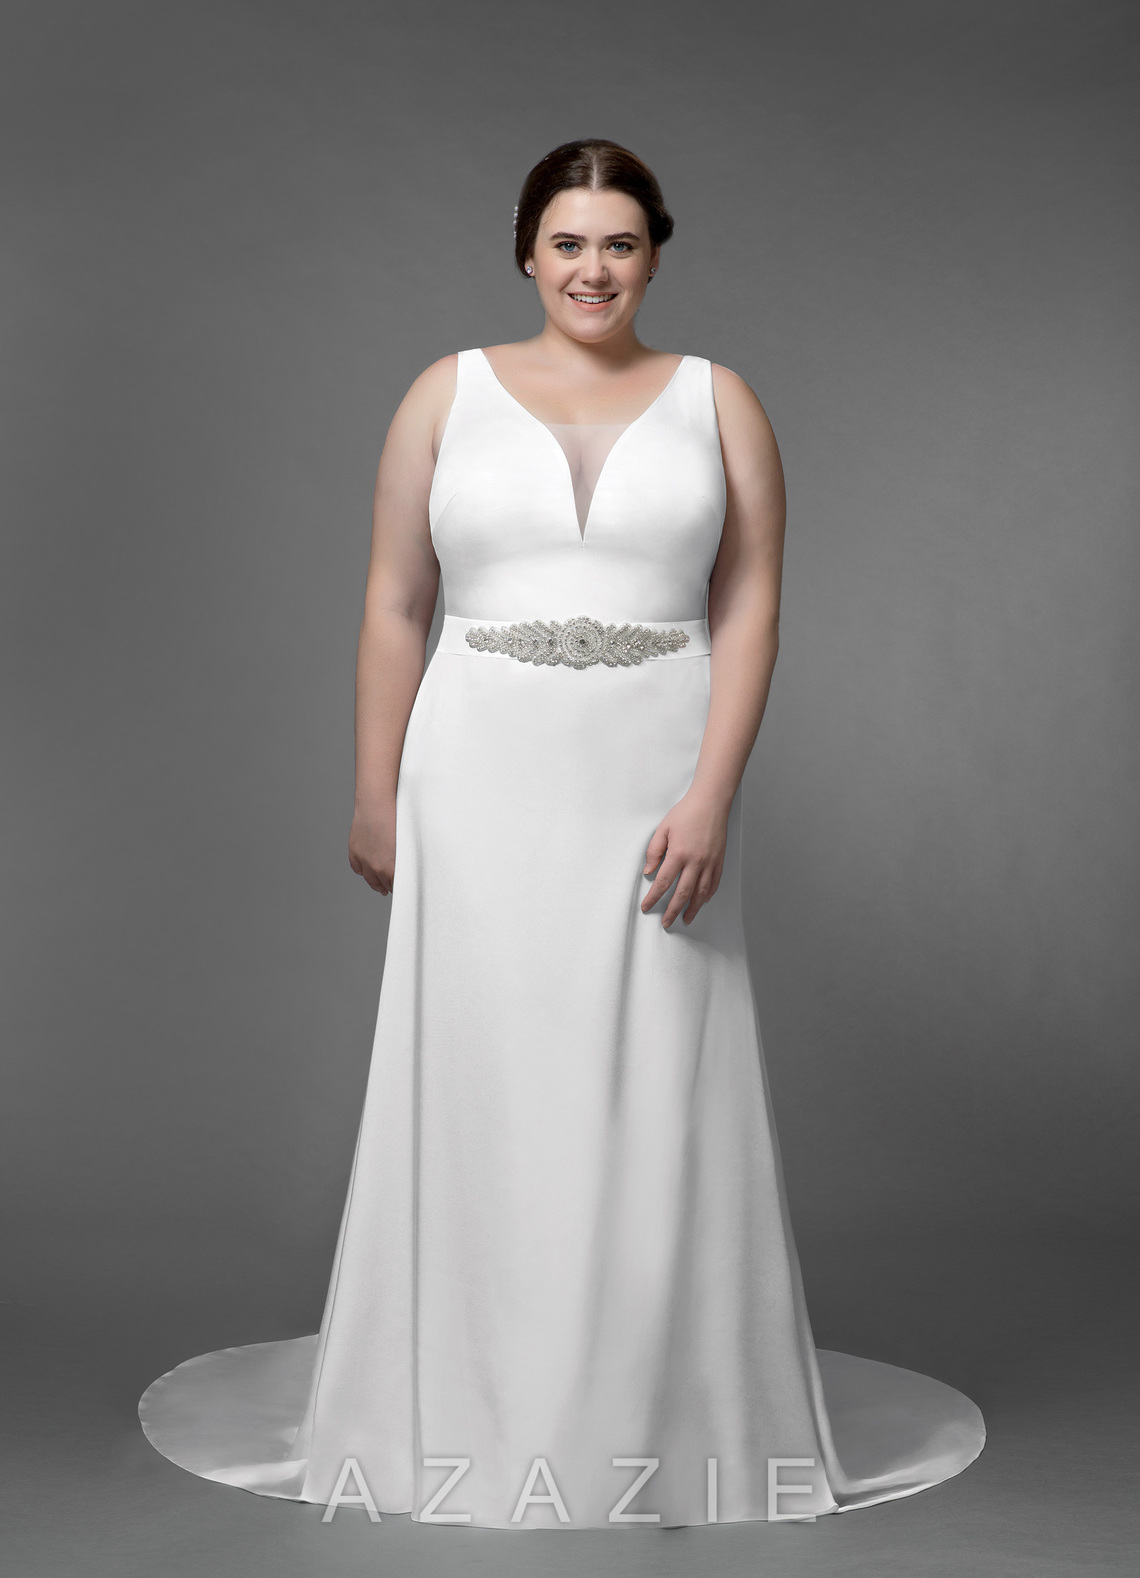 plus size woman wearing a sleeveless belted wedding gown